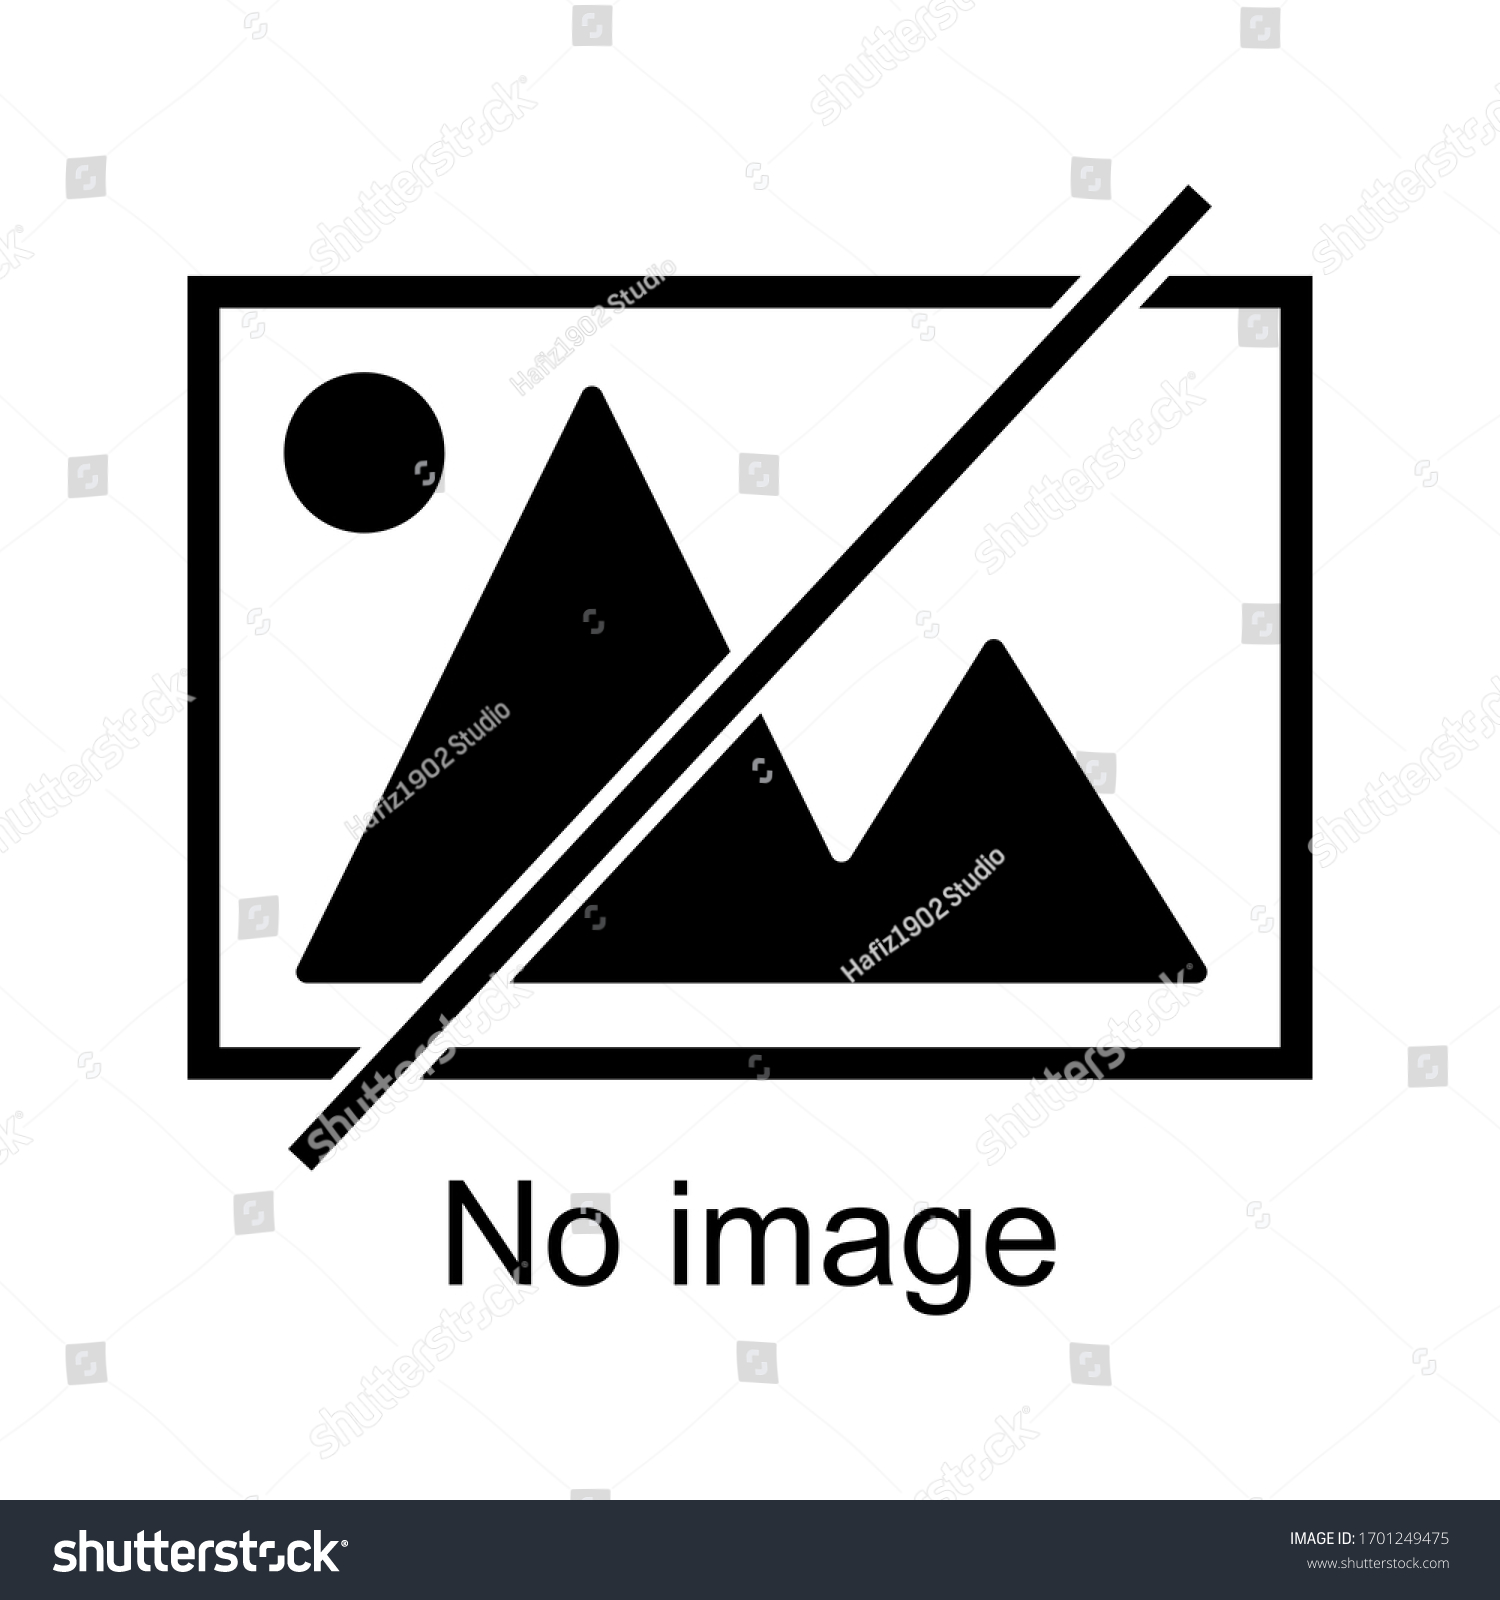 No Image Vector Isolated On White Stock Vector (Royalty Free ...